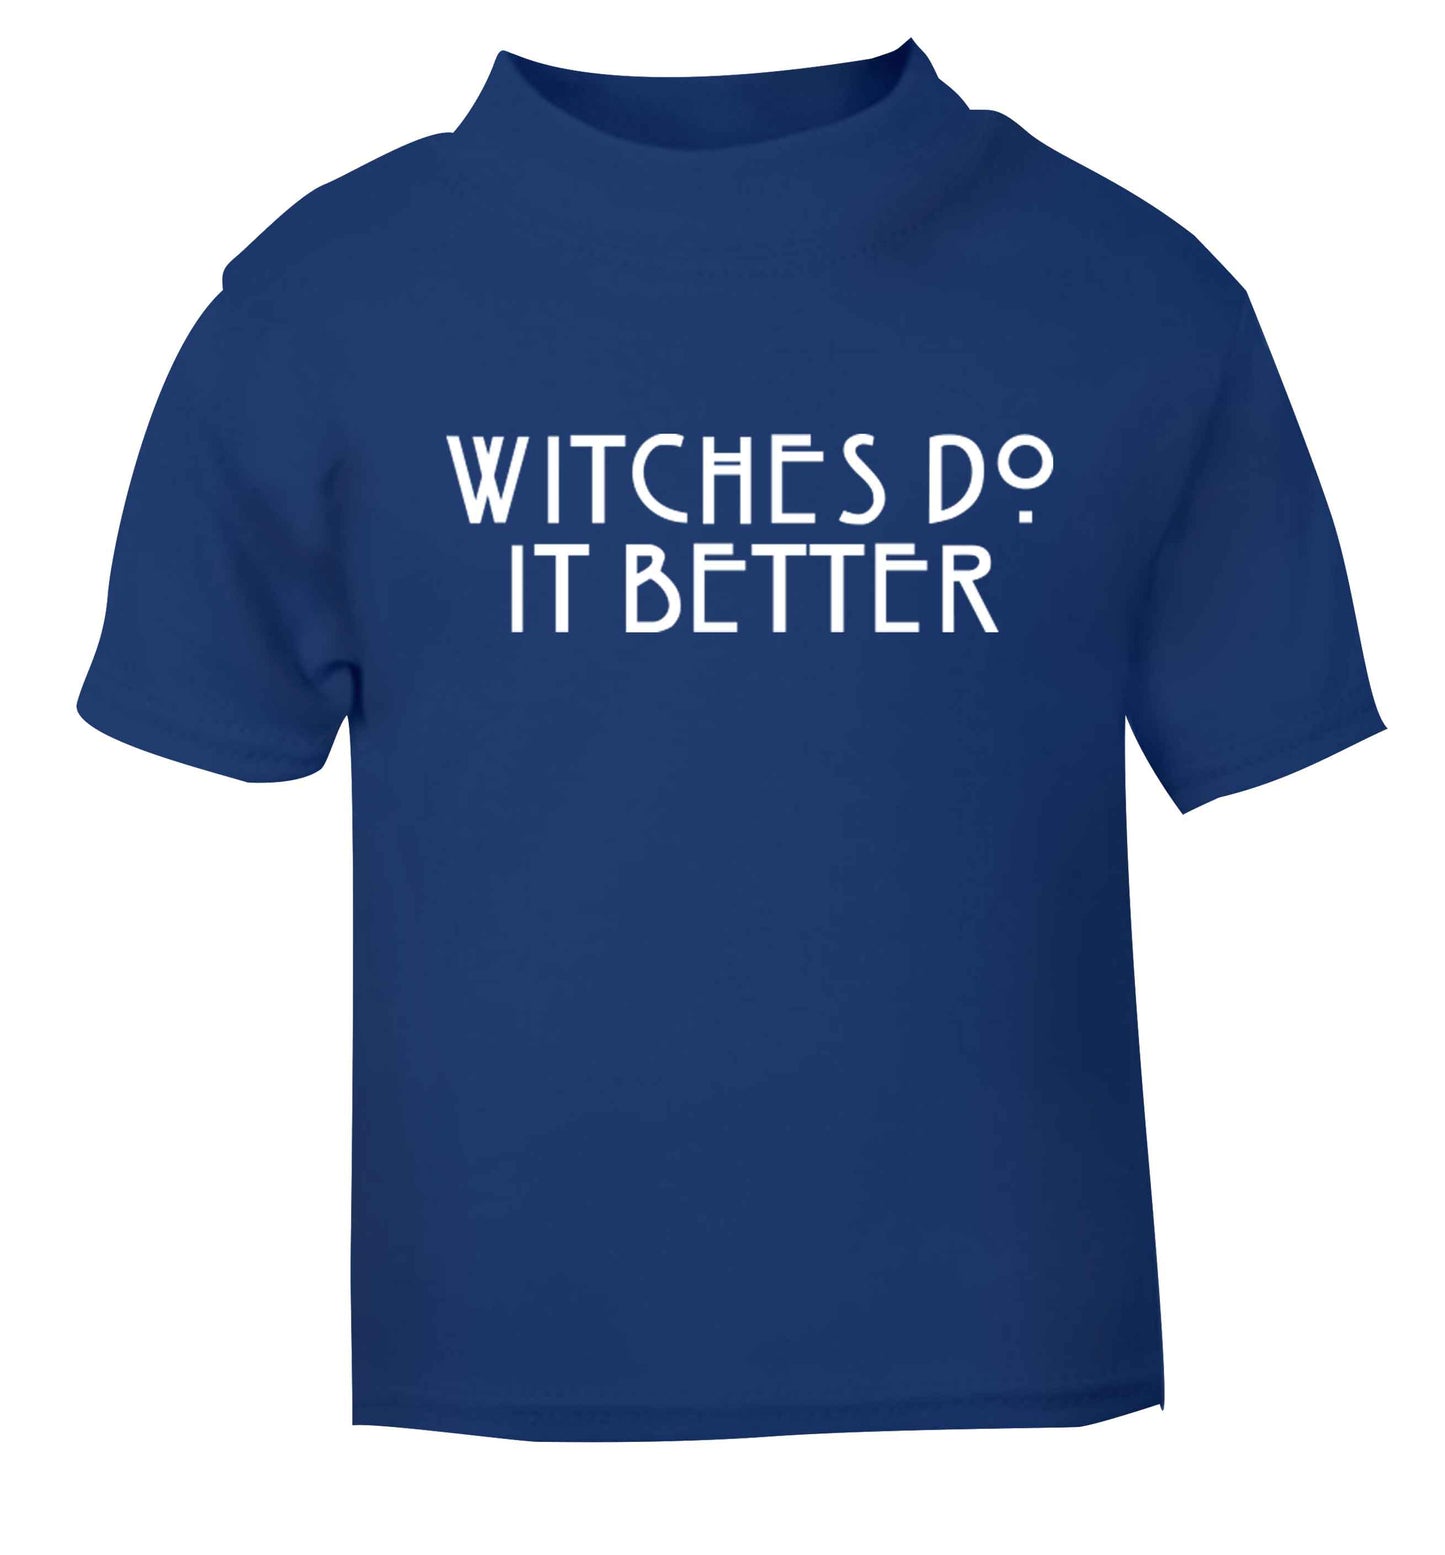 Witches do it better blue baby toddler Tshirt 2 Years